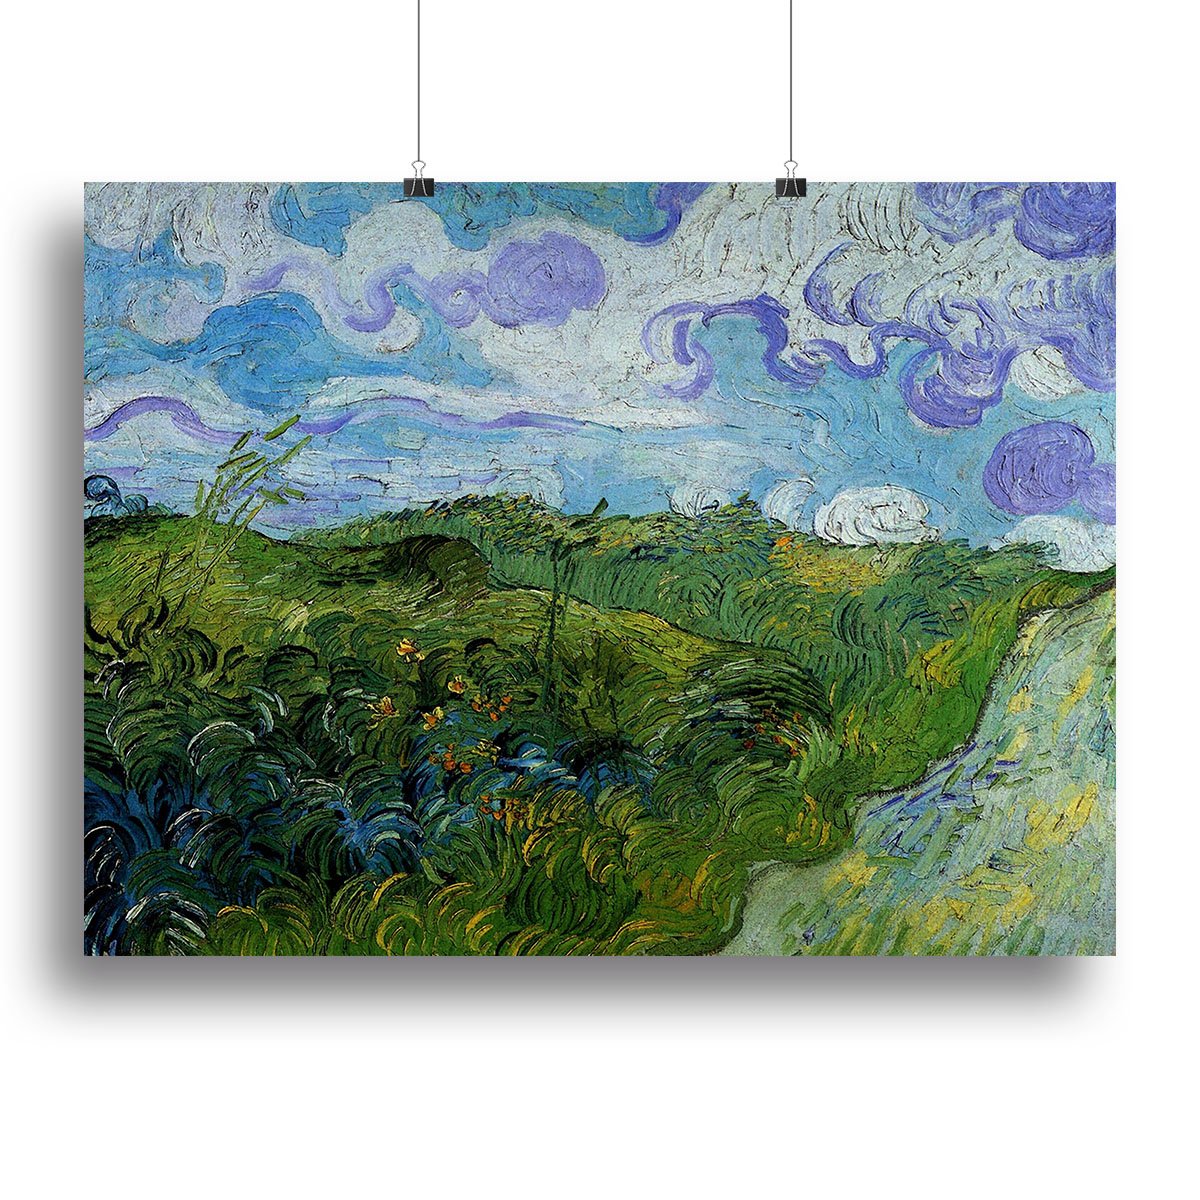 Green Wheat Fields by Van Gogh Canvas Print or Poster